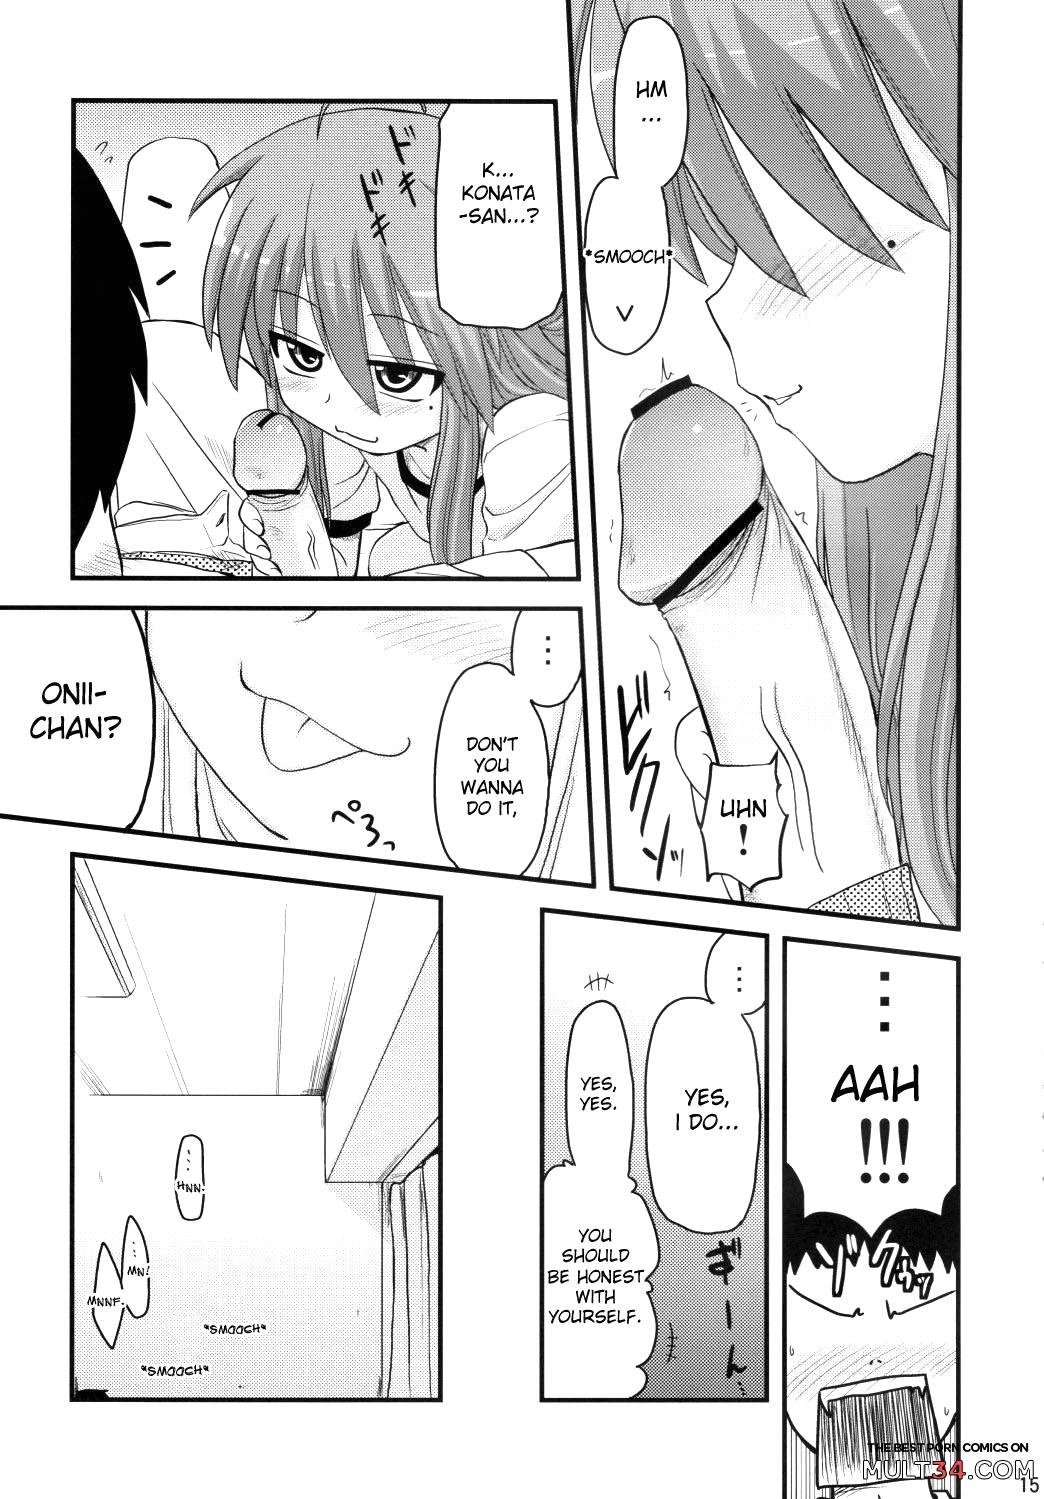 Konata and Oh-zu 4 people each and every one + 1 page 11